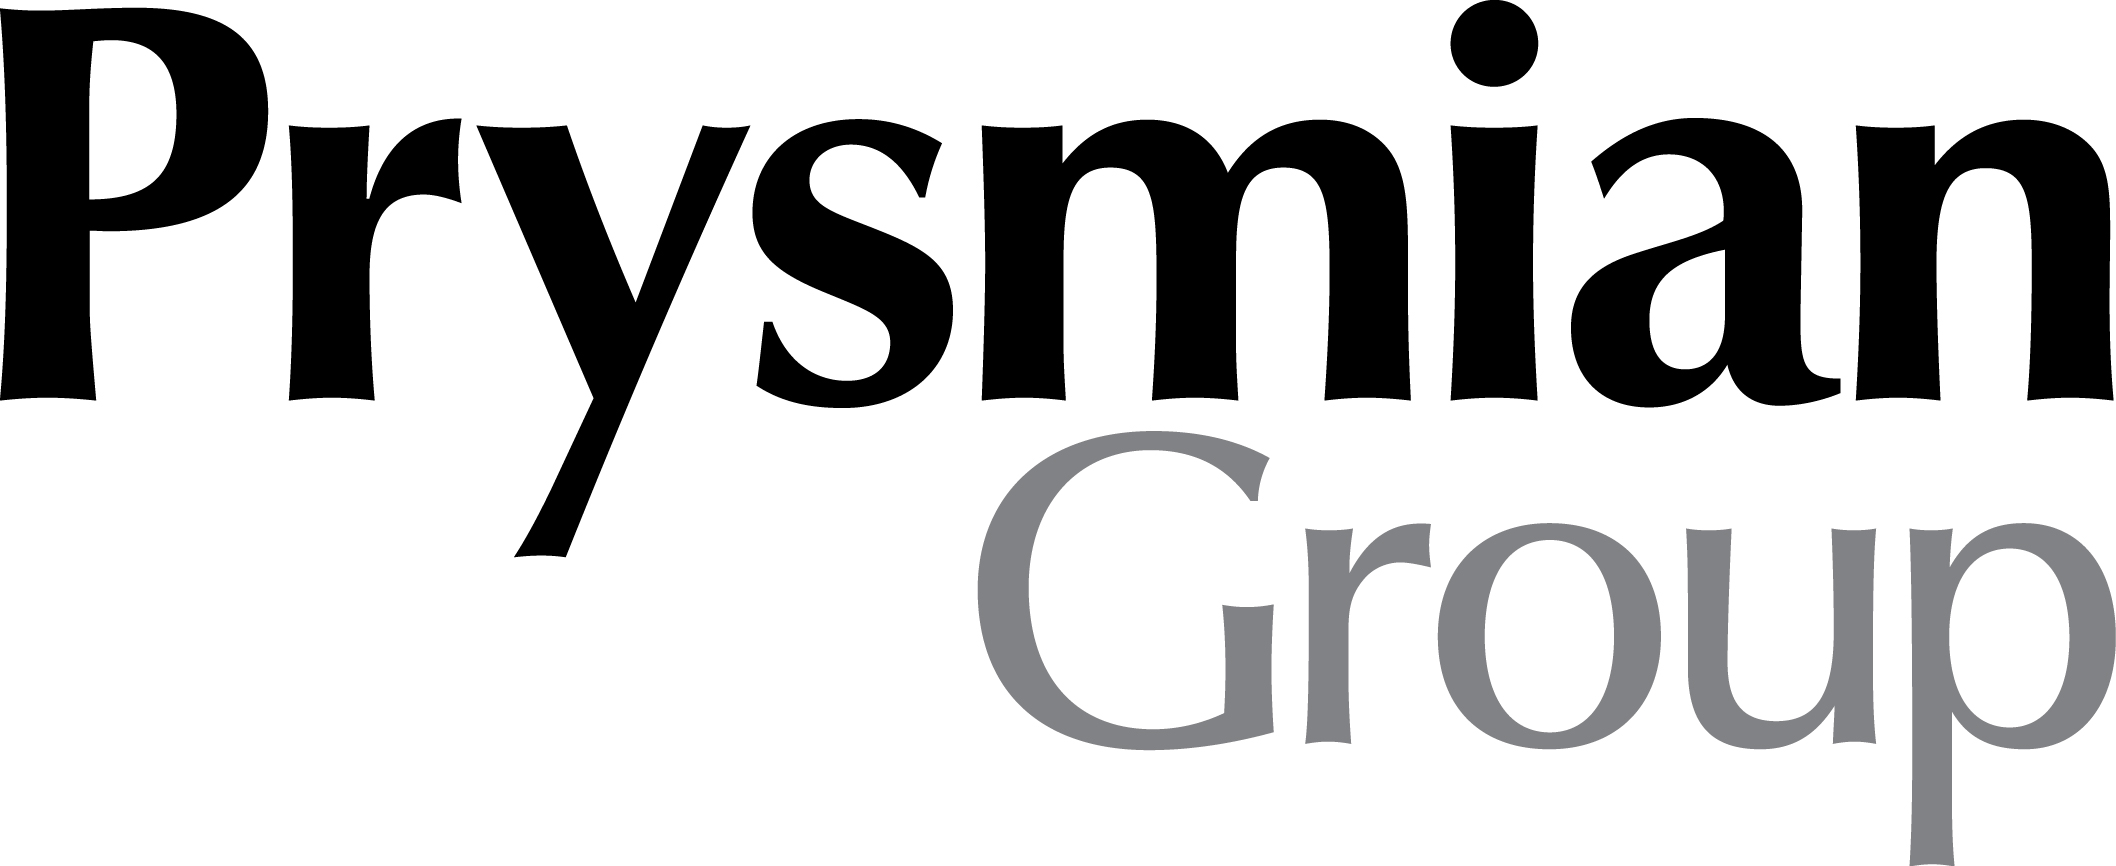 Profile image for Prysmian Kabel und Systeme GmbH - Wuppertal